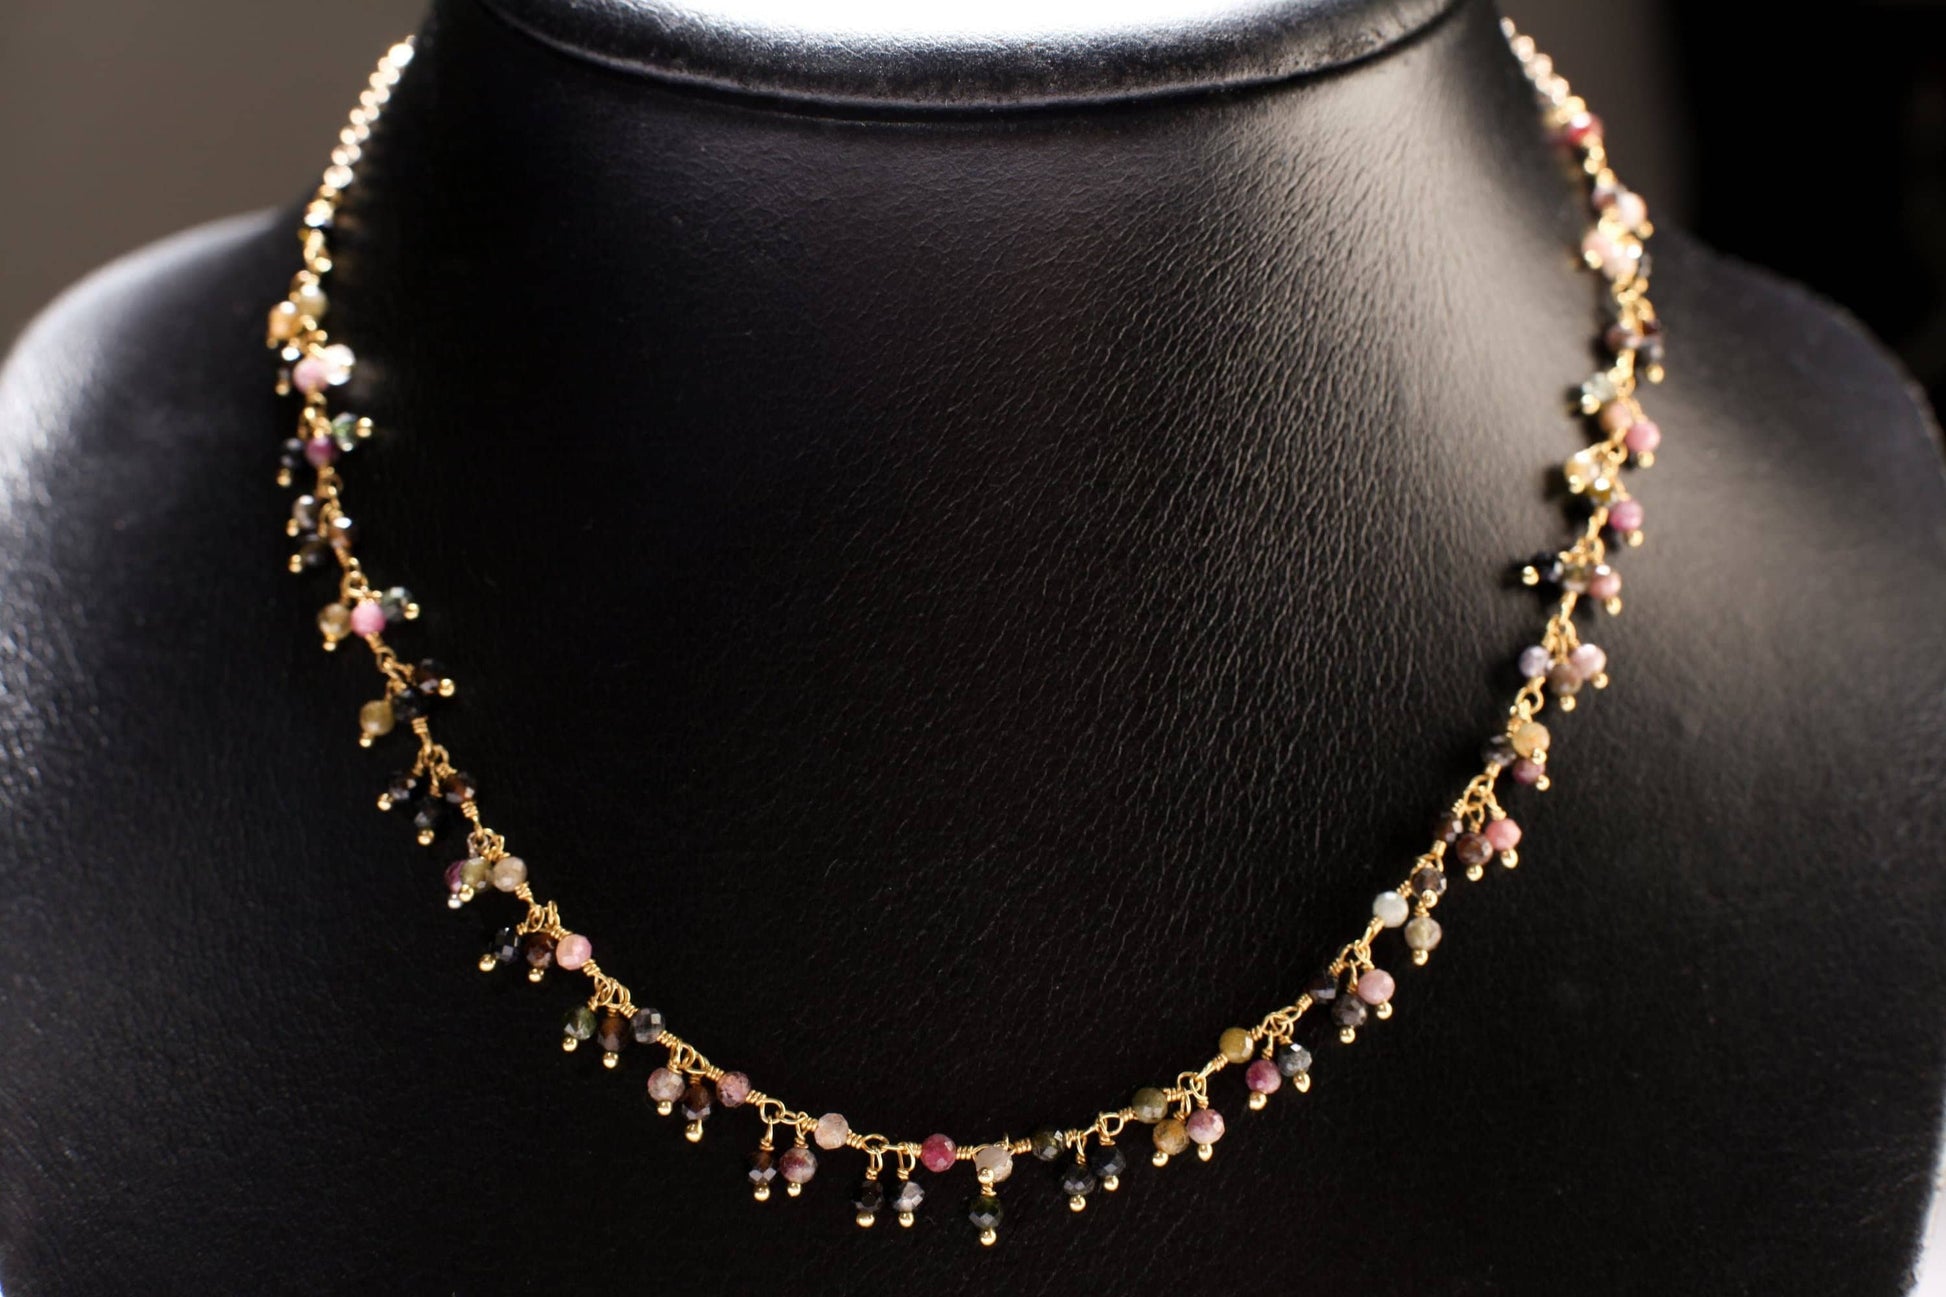 Genuine Watermelon multi Tourmaline Wire Wrapped Clusters Necklace in 14K Gold Filled Chain, Clasp, Valentine Gift